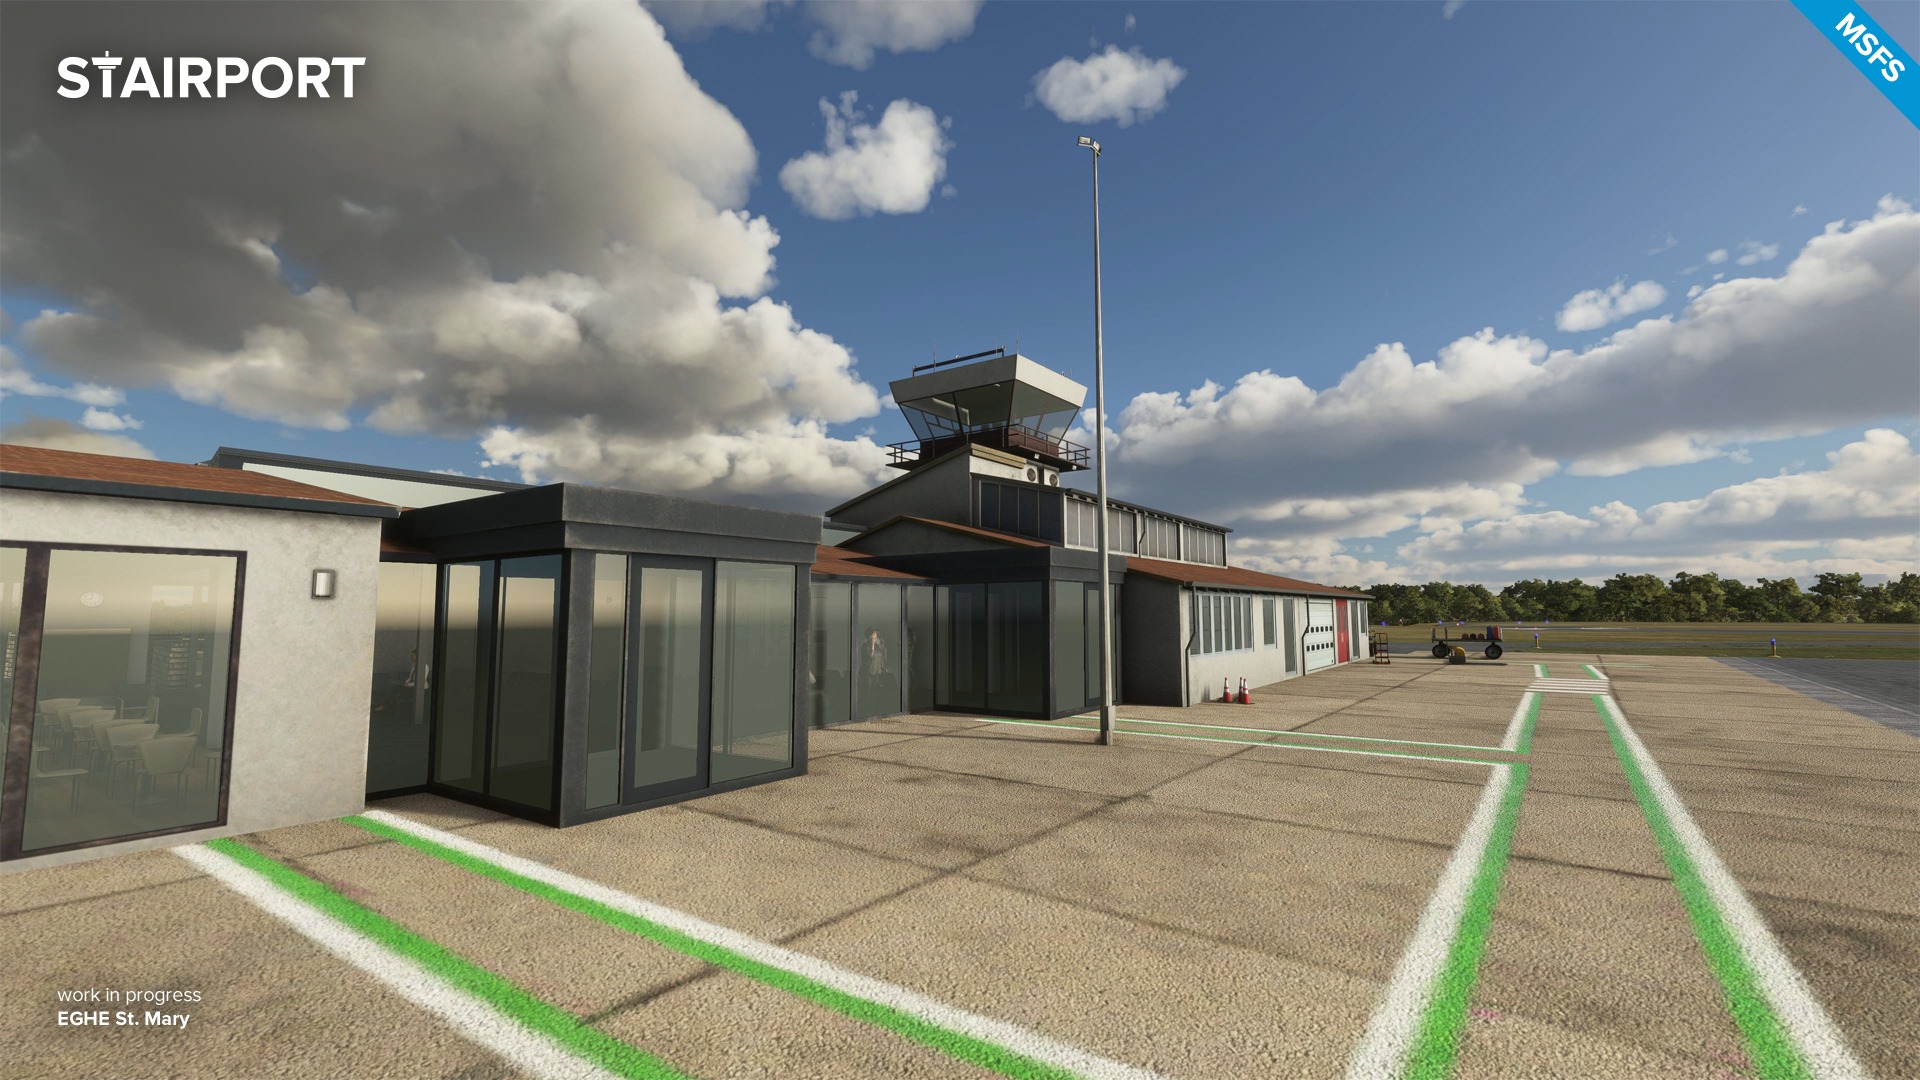 Stairport Sceneries Previews St. Mary Airfield for MSFS - Microsoft Flight Simulator, Stairport Sceneries